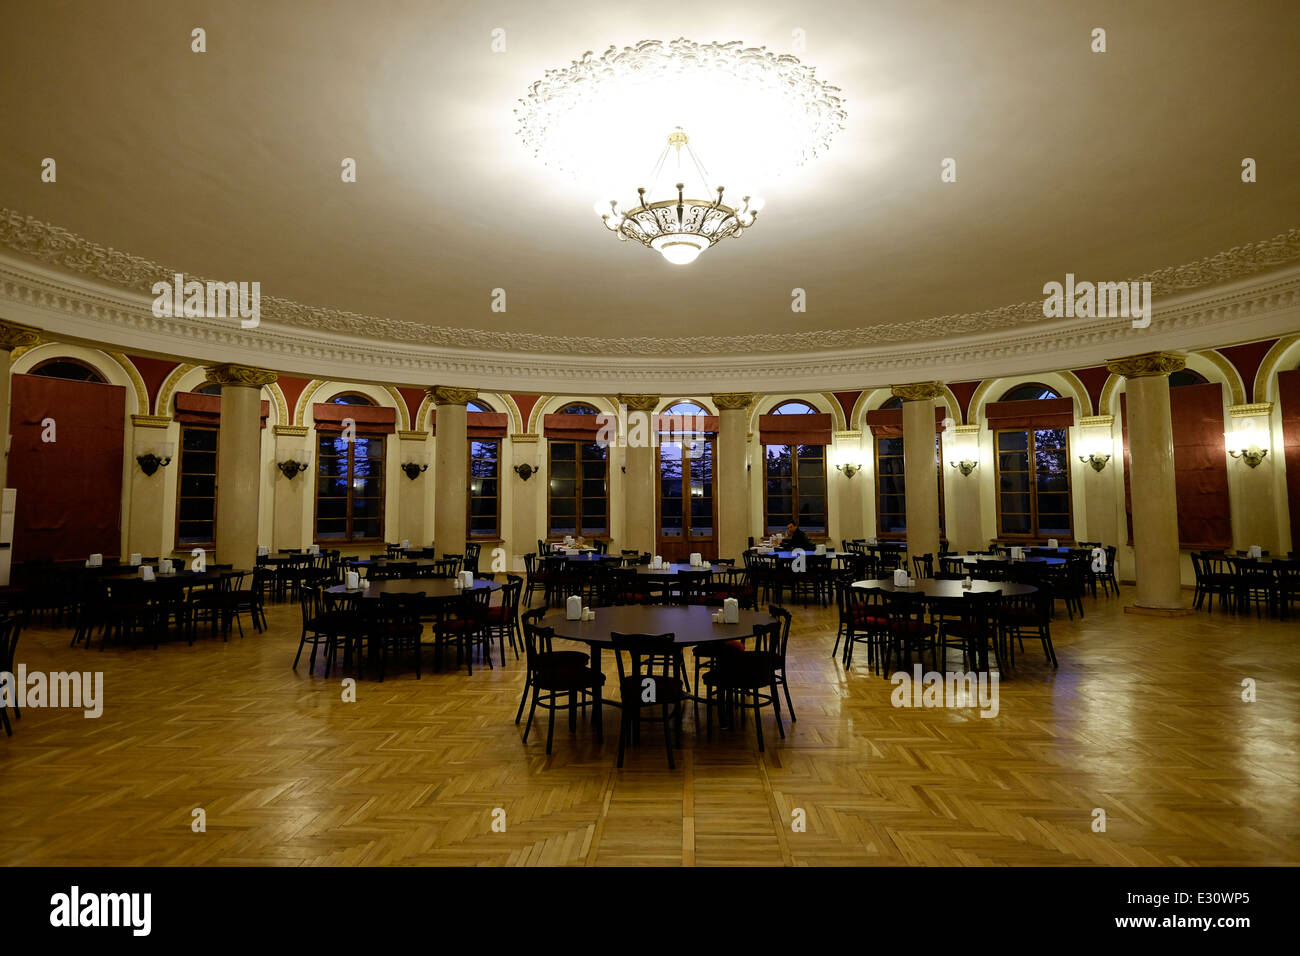 The elegant dining room of hotel Tskaltubo Spa Resort where Stalin used to spent his vacations in the town of Tskaltubo in Imereti province in the Republic of Georgia Stock Photo